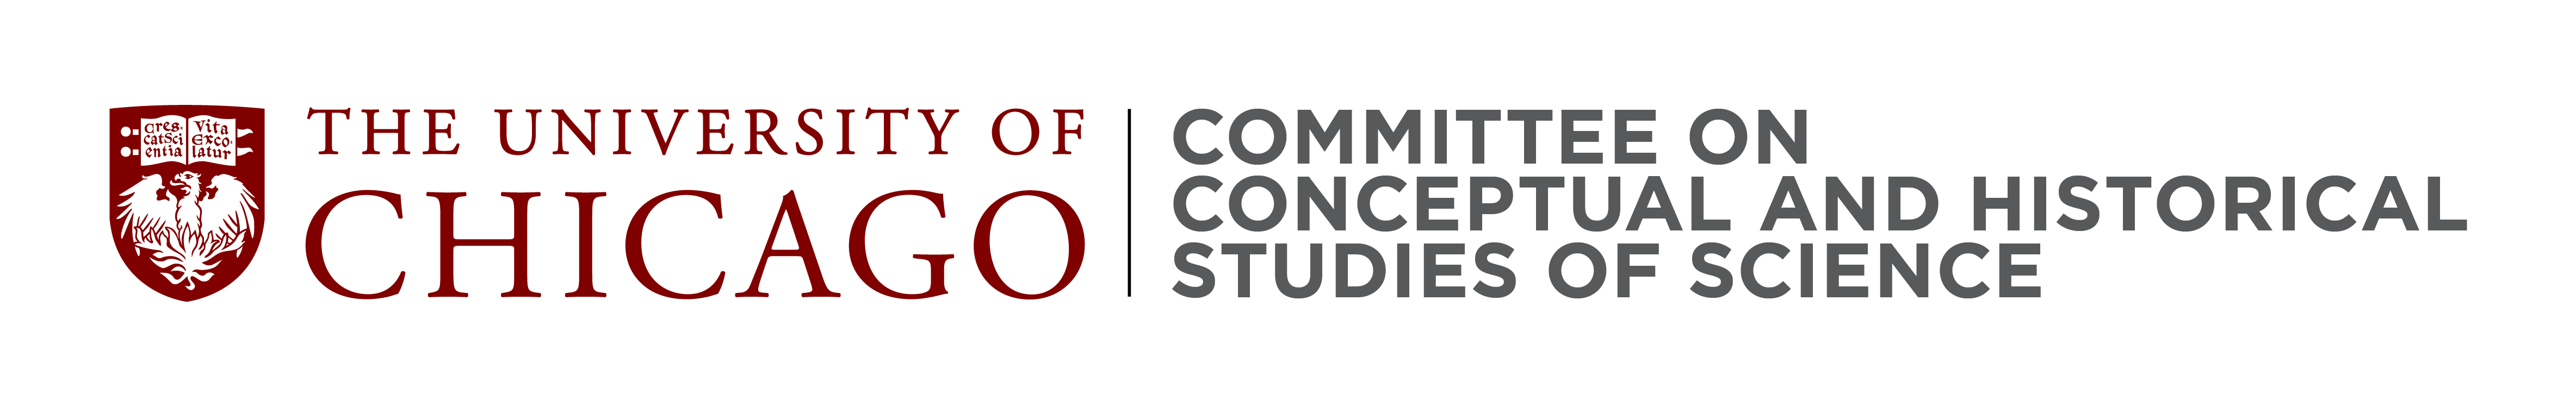 UC Committee on the Conceptual and Historical Studies of Science Logo